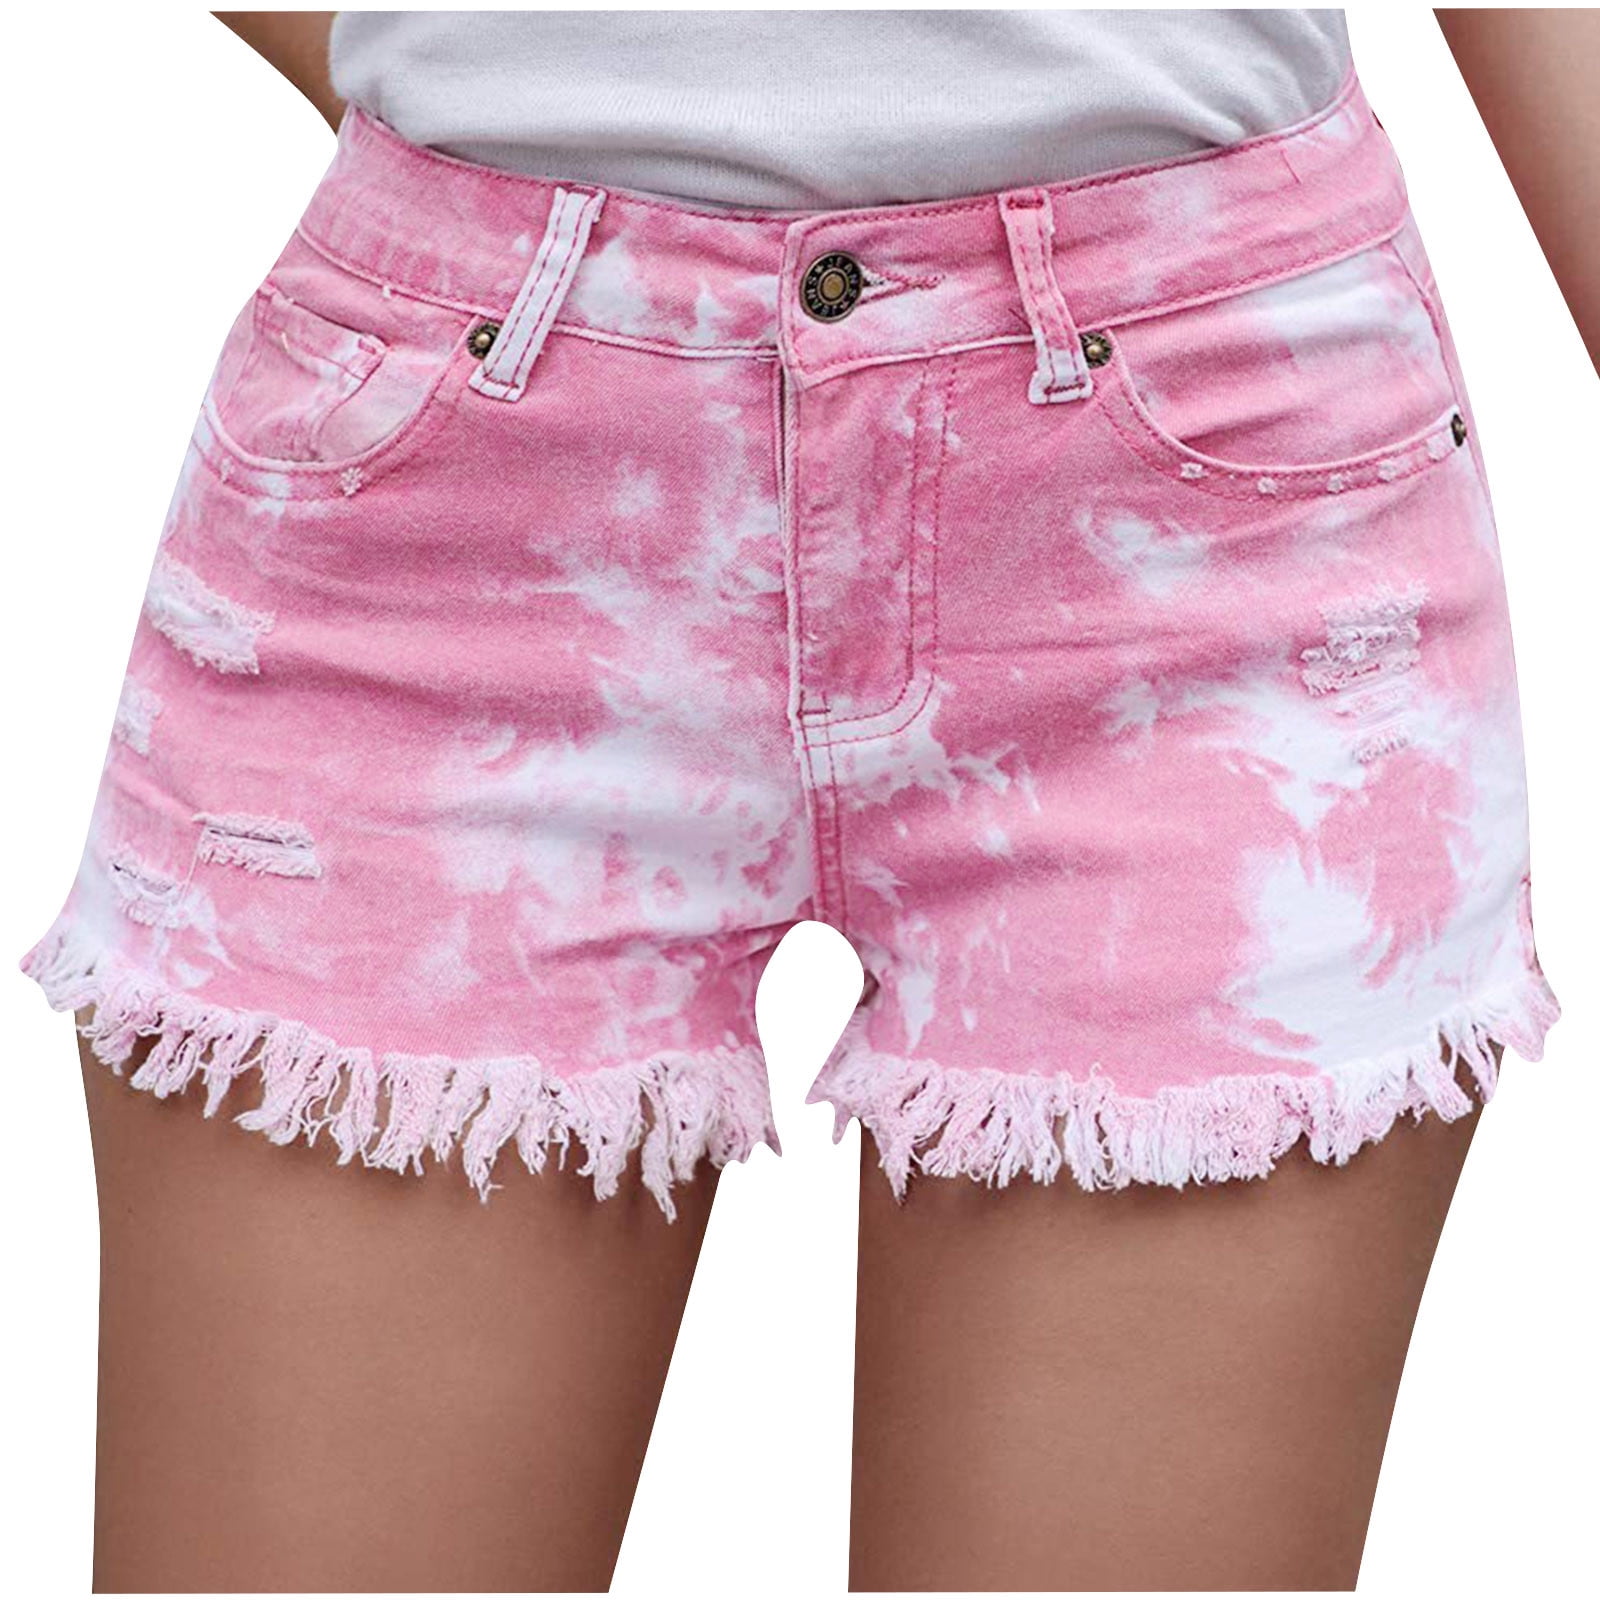 JWZUY Gradient Tie Dye Denim Shorts Women Frayed Hem Stretchy Jeans Shorts  for Women Casual Summer Mid Rise Distressed Shorts with Pockets Hot Pink XL